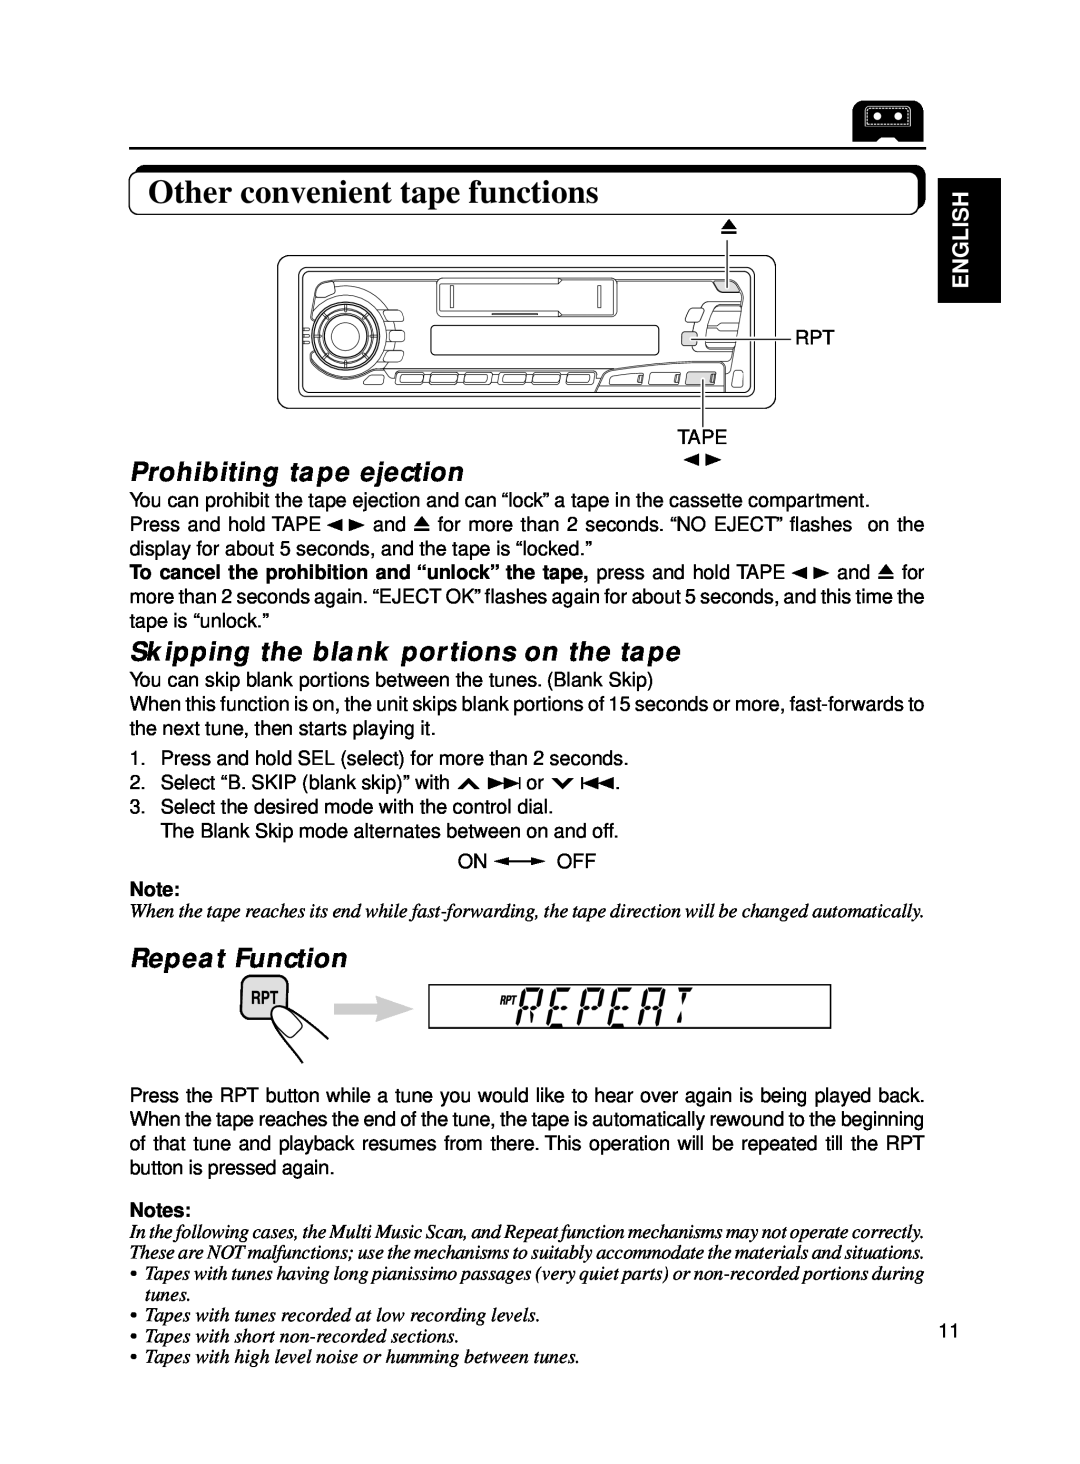 JVC KS-FX250 Other convenient tape functions, Prohibiting tape ejection, Skipping the blank portions on the tape, English 